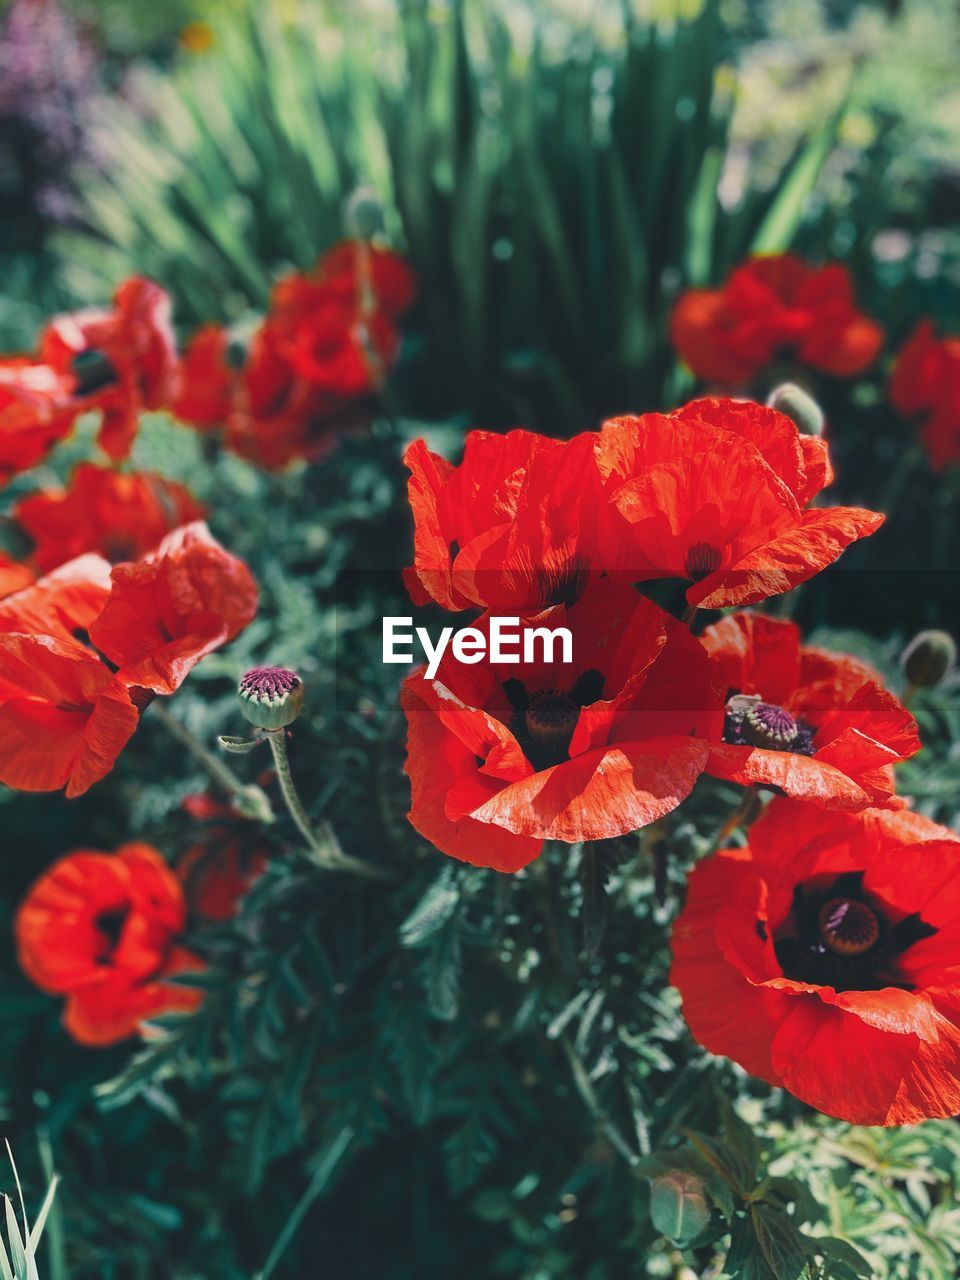 plant, flower, flowering plant, red, beauty in nature, freshness, petal, nature, fragility, flower head, close-up, growth, inflorescence, poppy, no people, focus on foreground, day, outdoors, botany, plant part, blossom, leaf